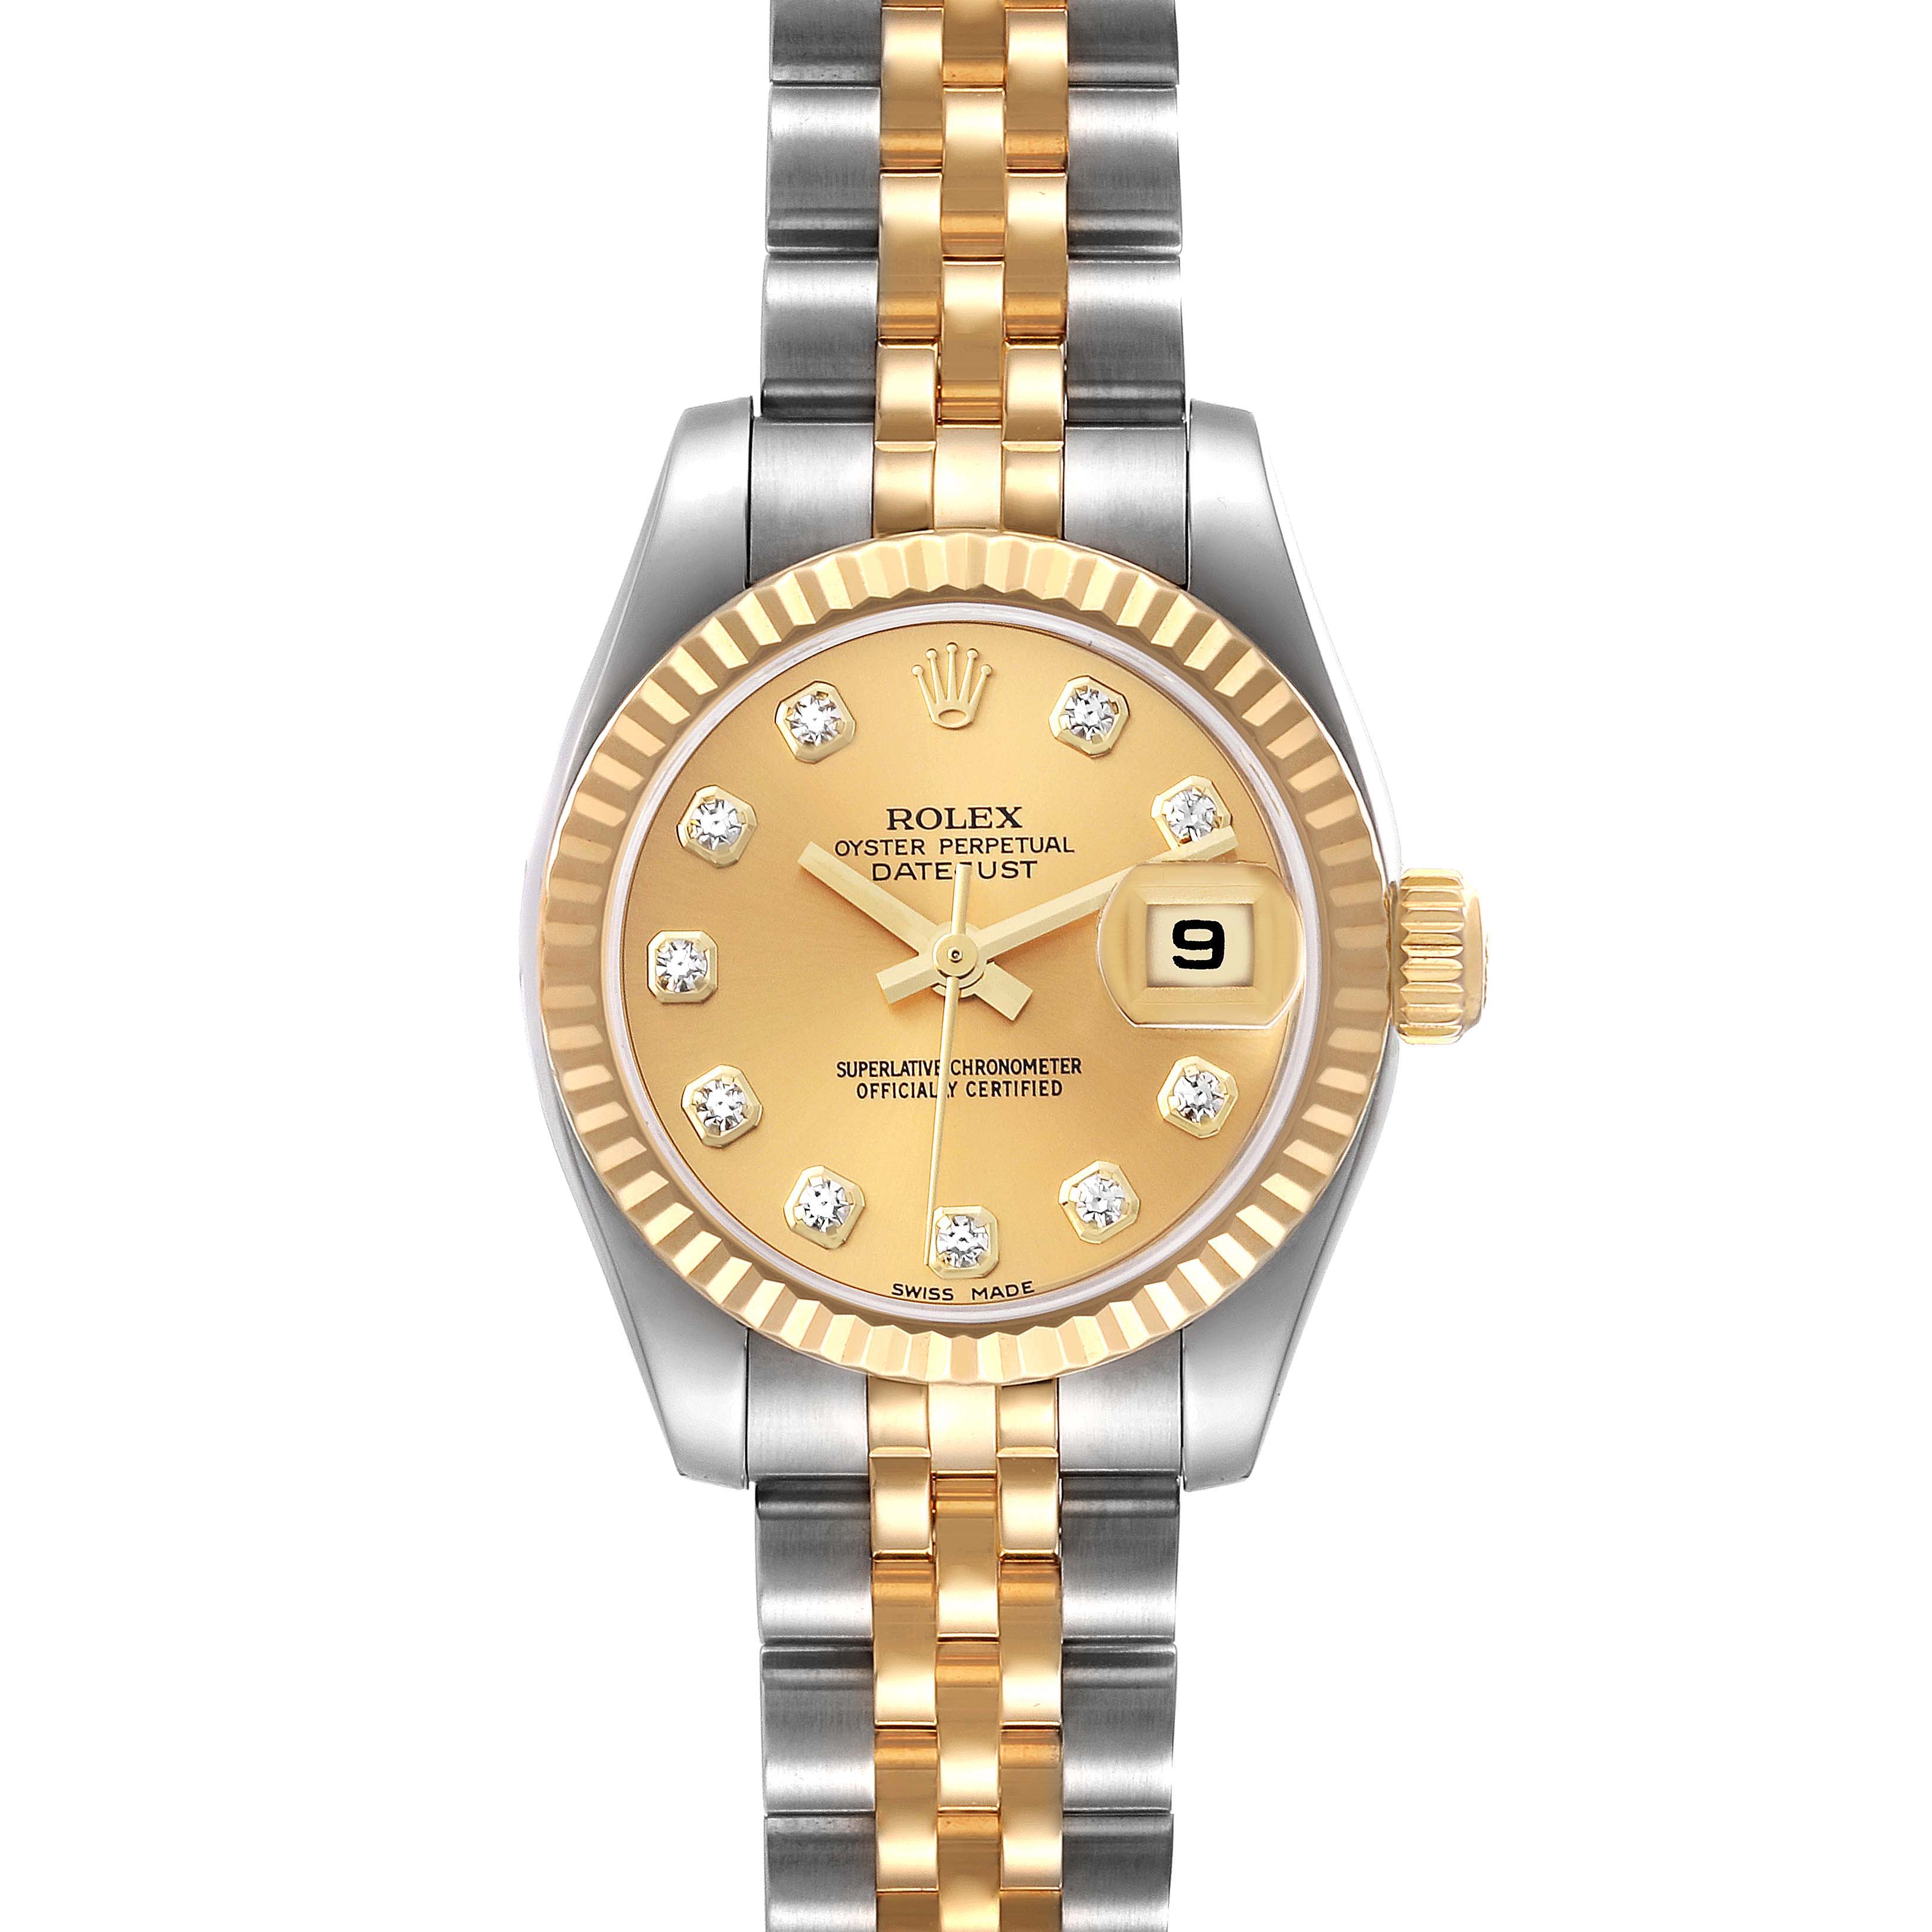 Rolex Datejust Steel Gold Diamond Dial Watch Box Papers |